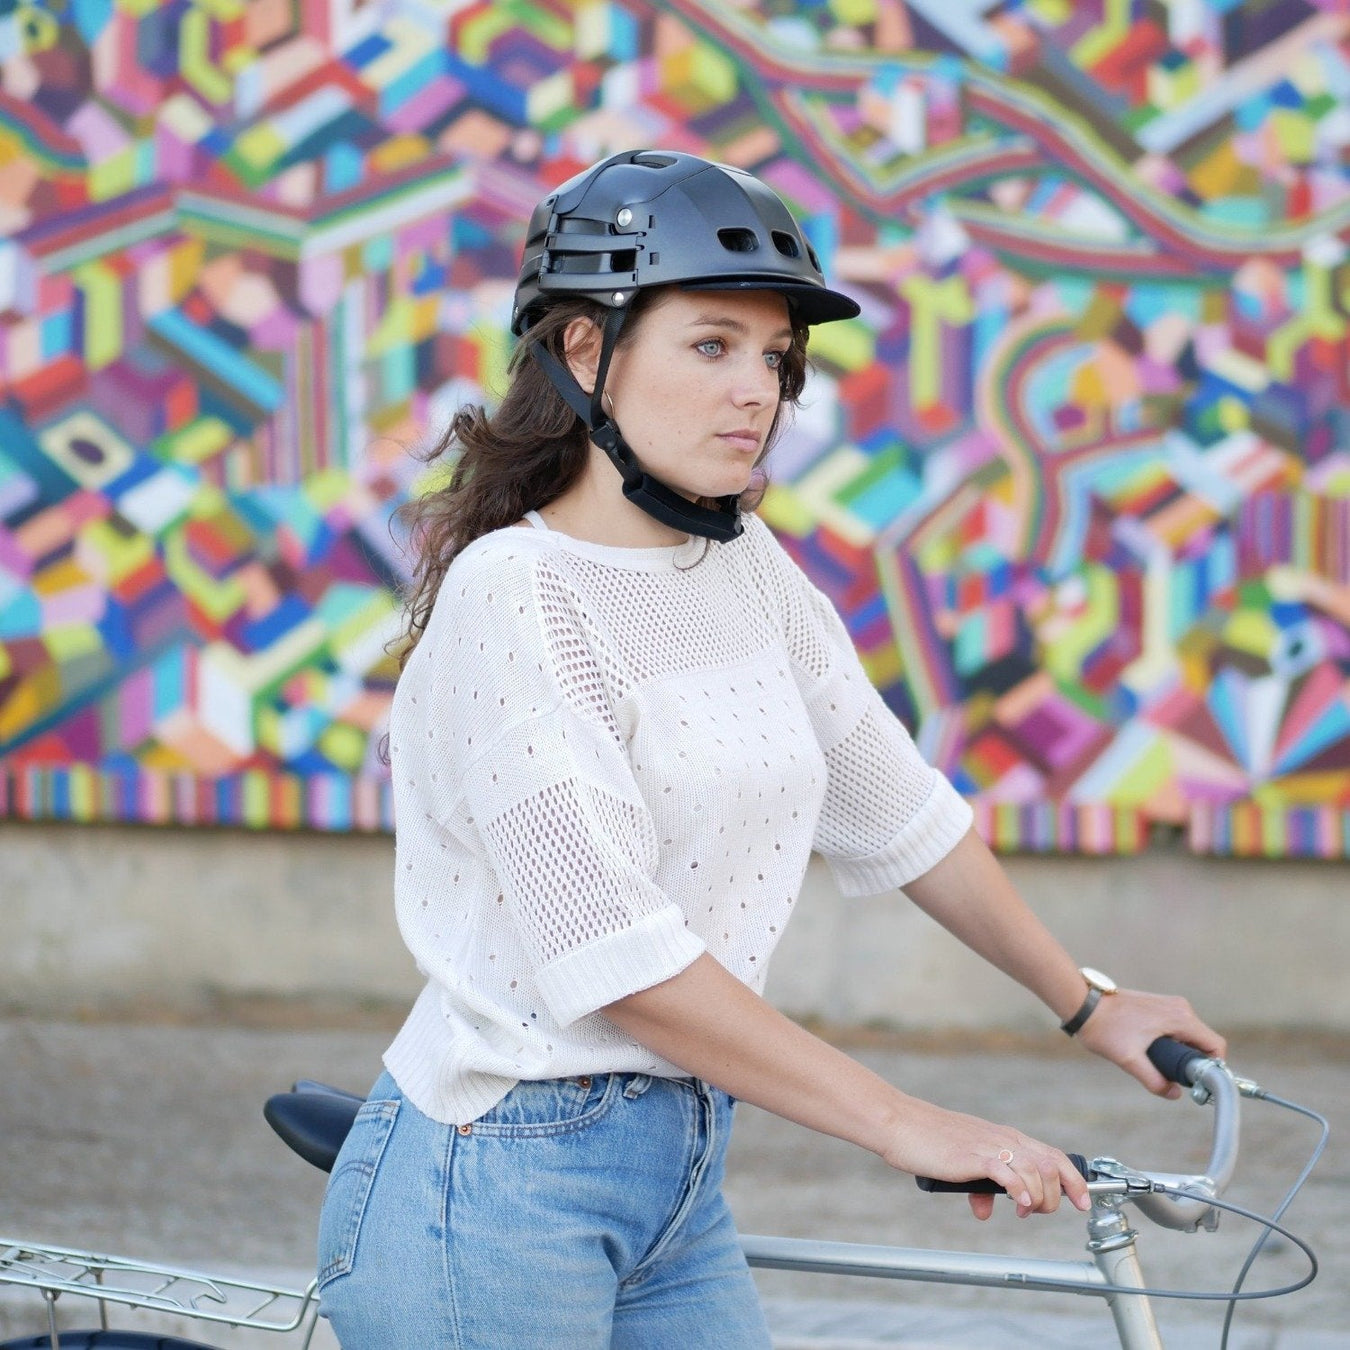 woman in white t-shirt and bicycle helmet stands against colourful wall, holding bicycle